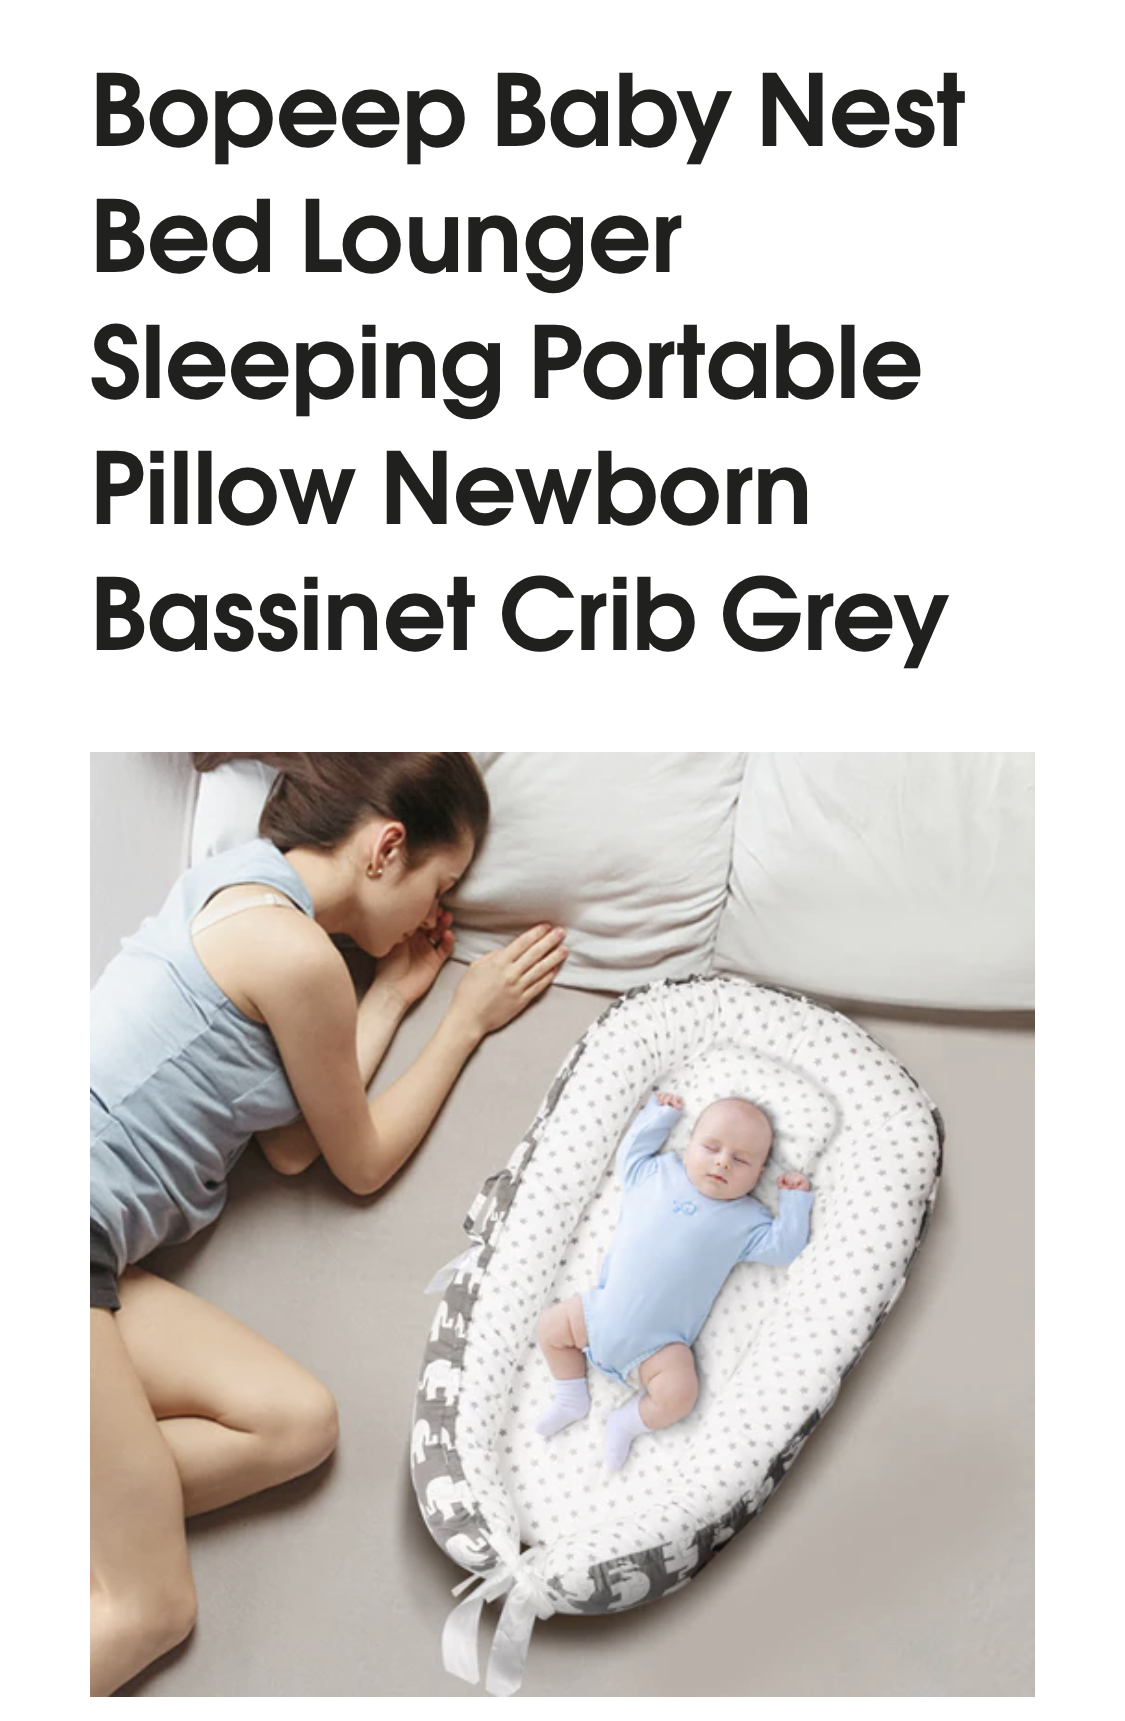 Bobeep Baby nest bed lounger